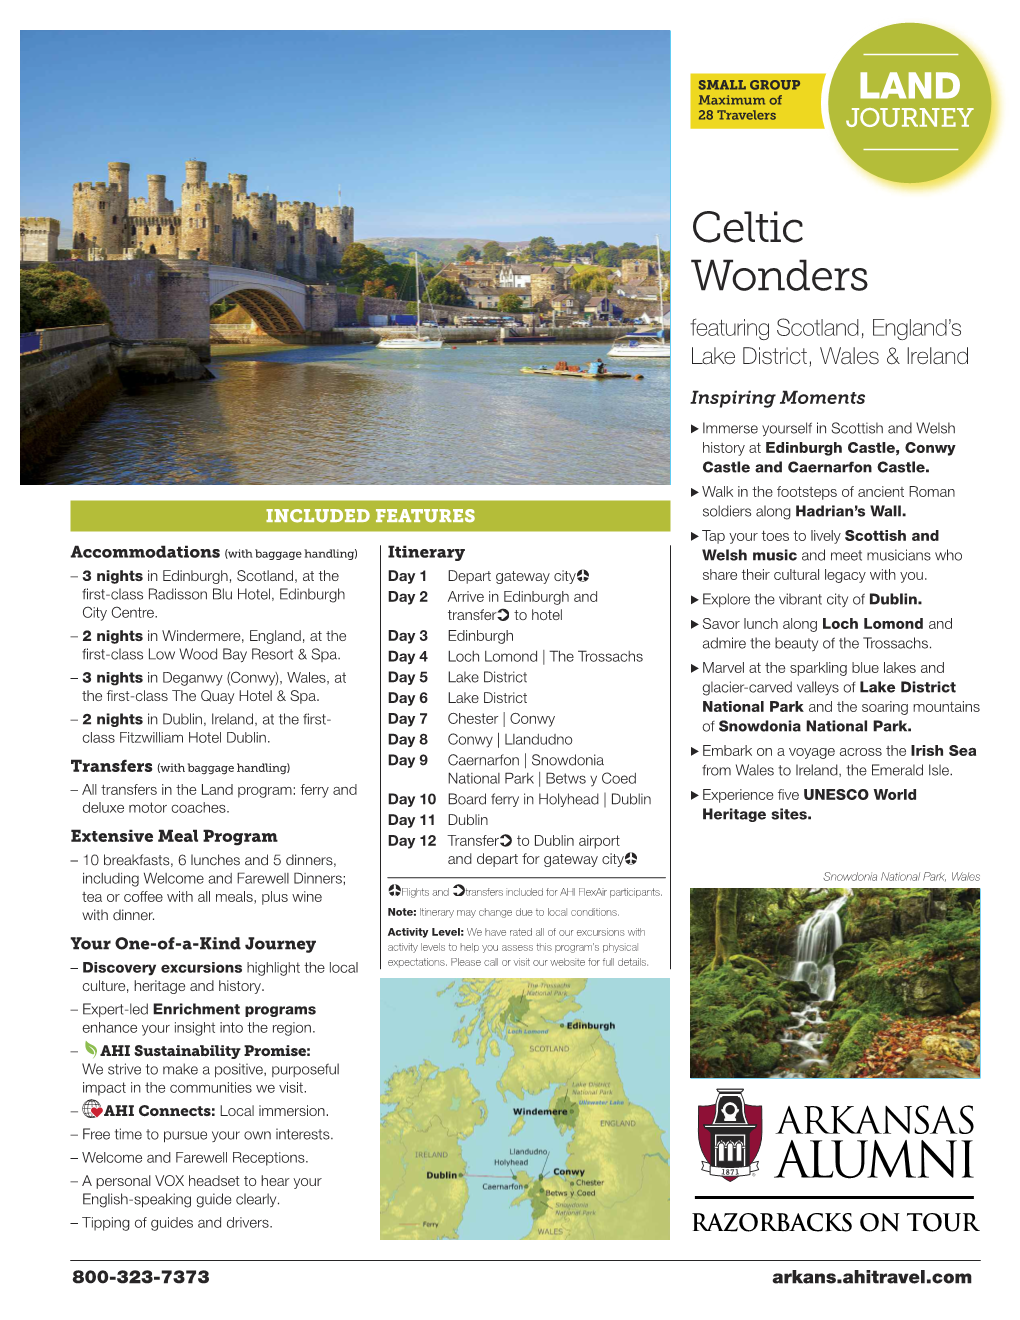 Celtic Wonders Featuring Scotland, England’S Lake District, Wales & Ireland